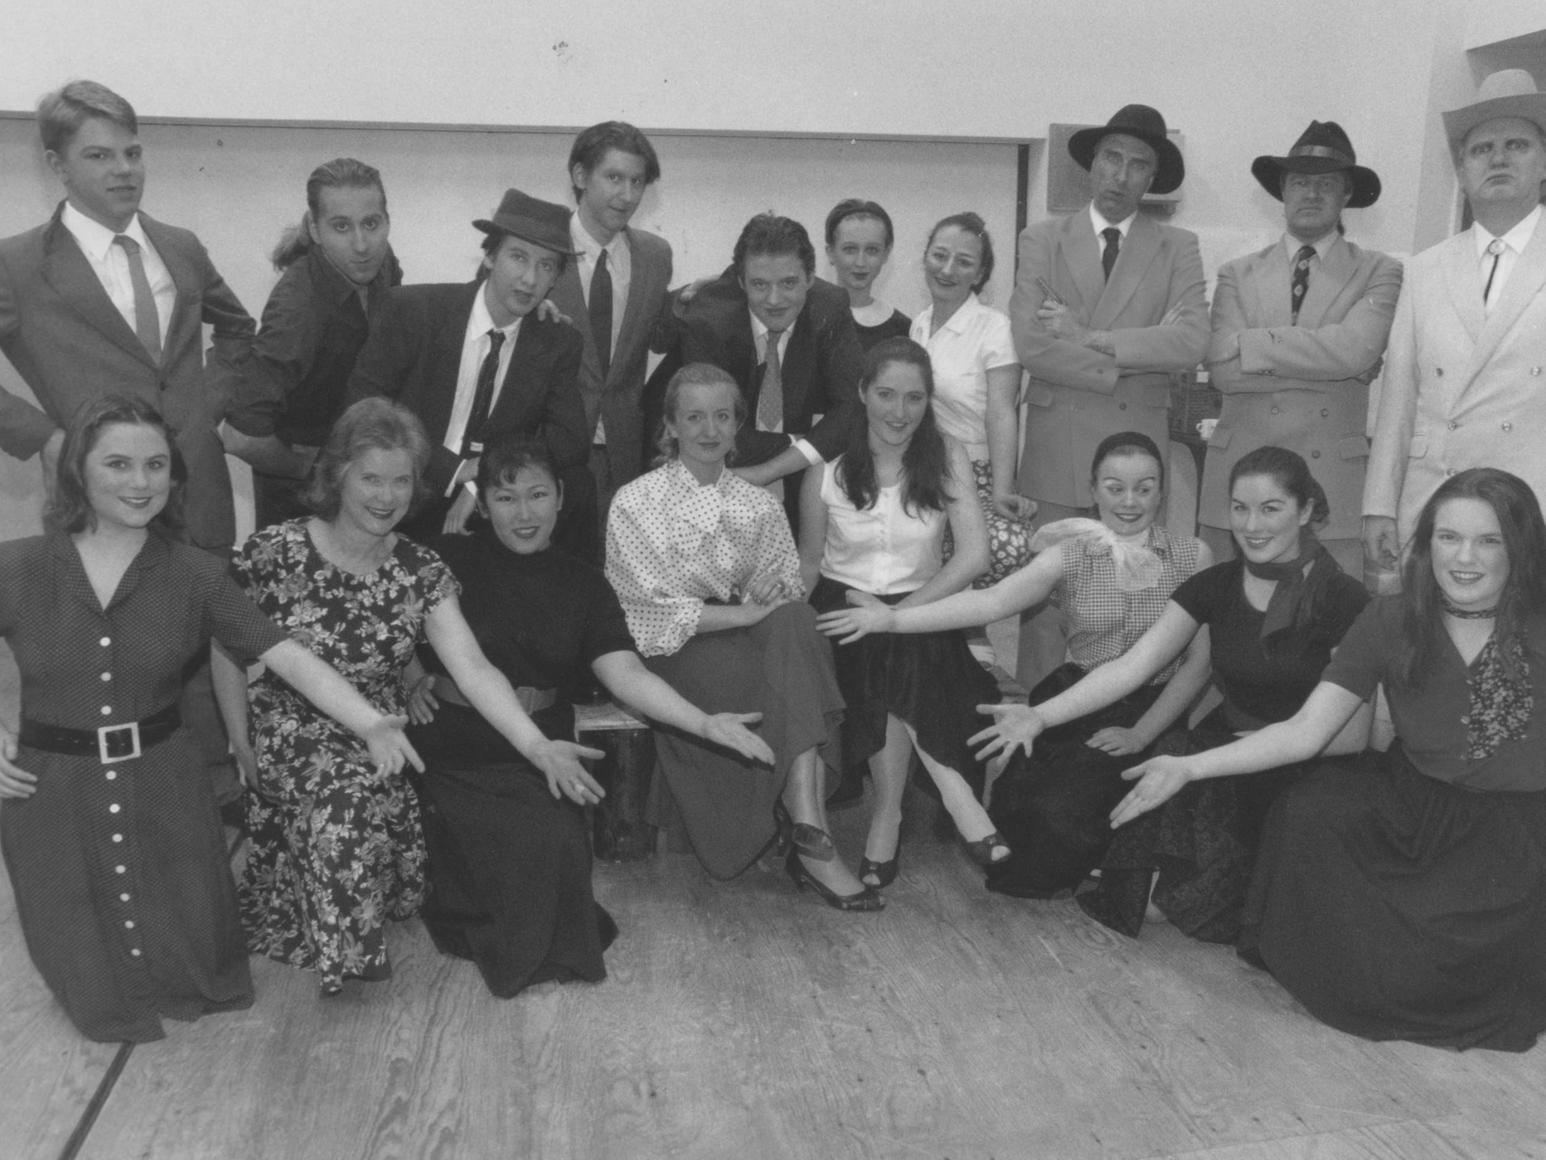 Pictured are the cast of Scarborough Sixth Form College's Kiss Me Kate in February 1997. They were in dress rehearsal before an evening performance.